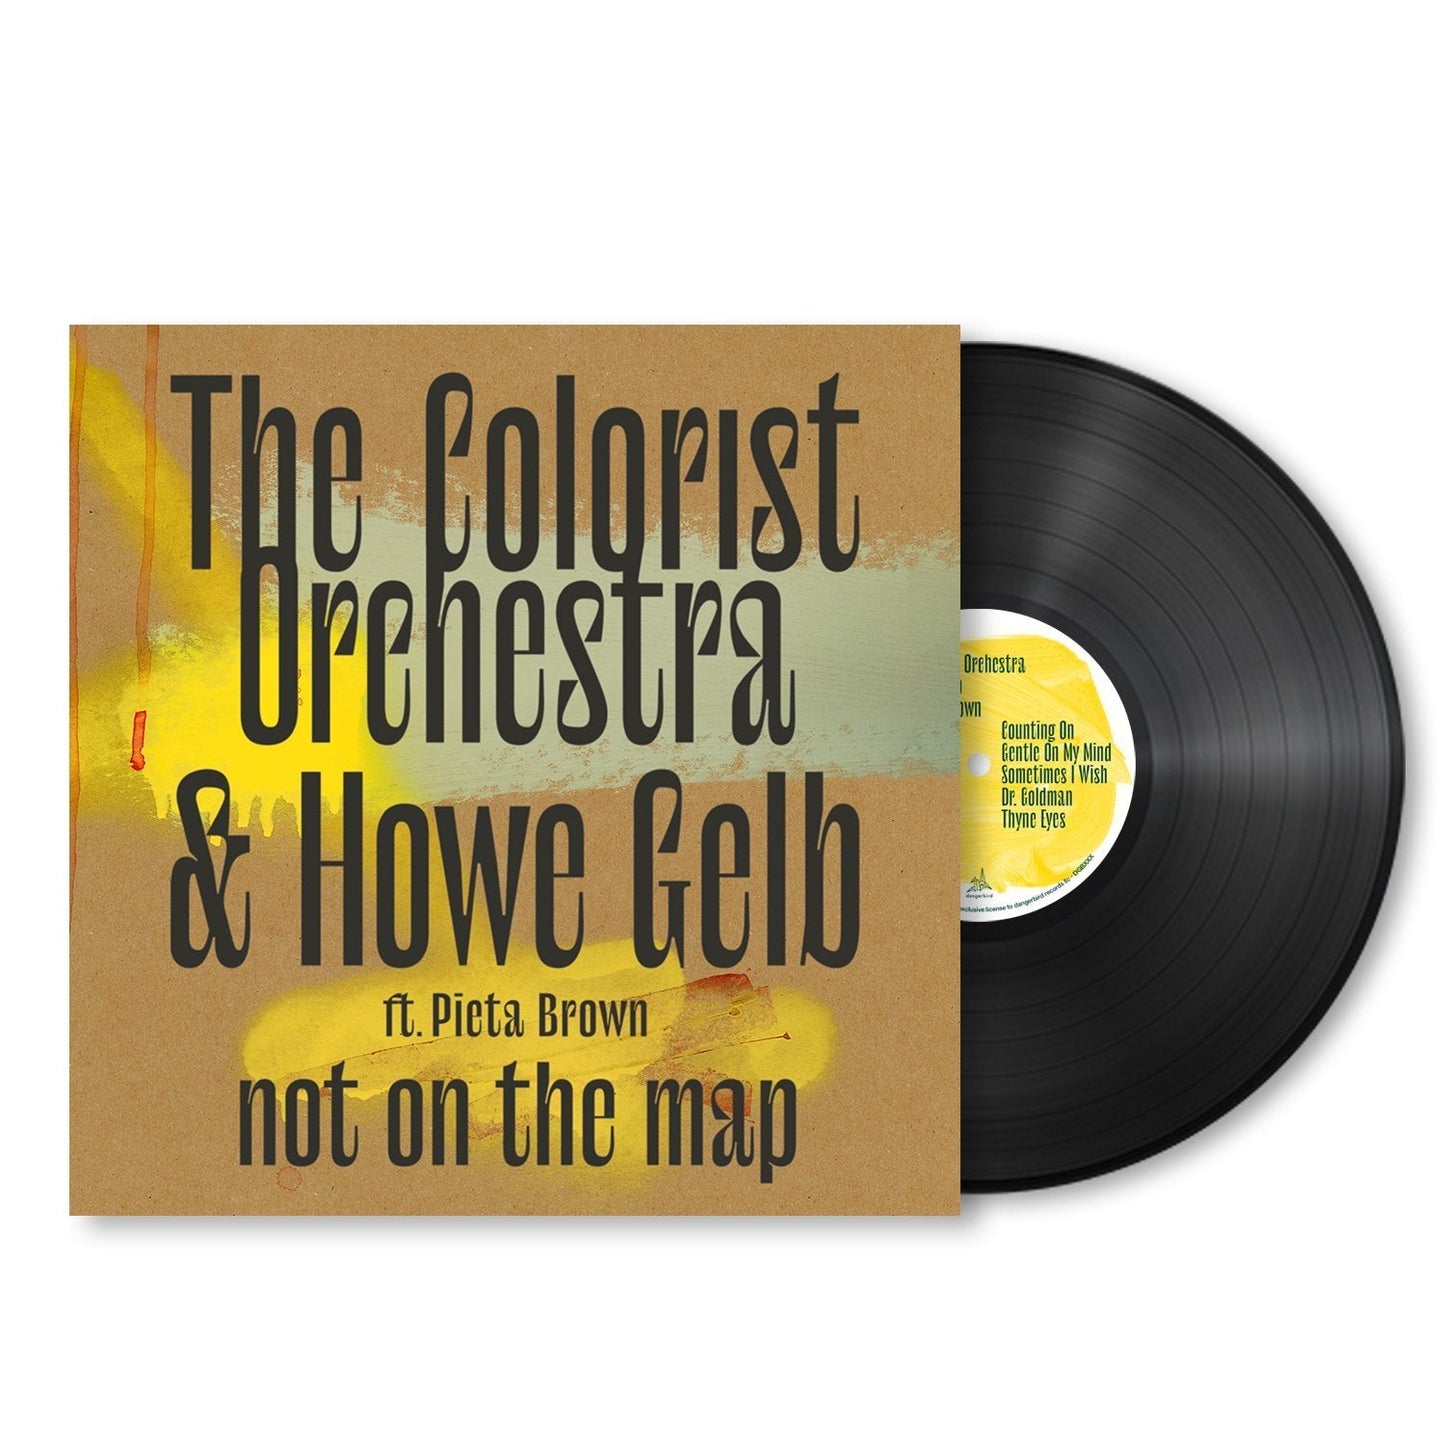 The Colorist Orchestra & Howe Gelb - Not On The Map - Custom Jacket LP